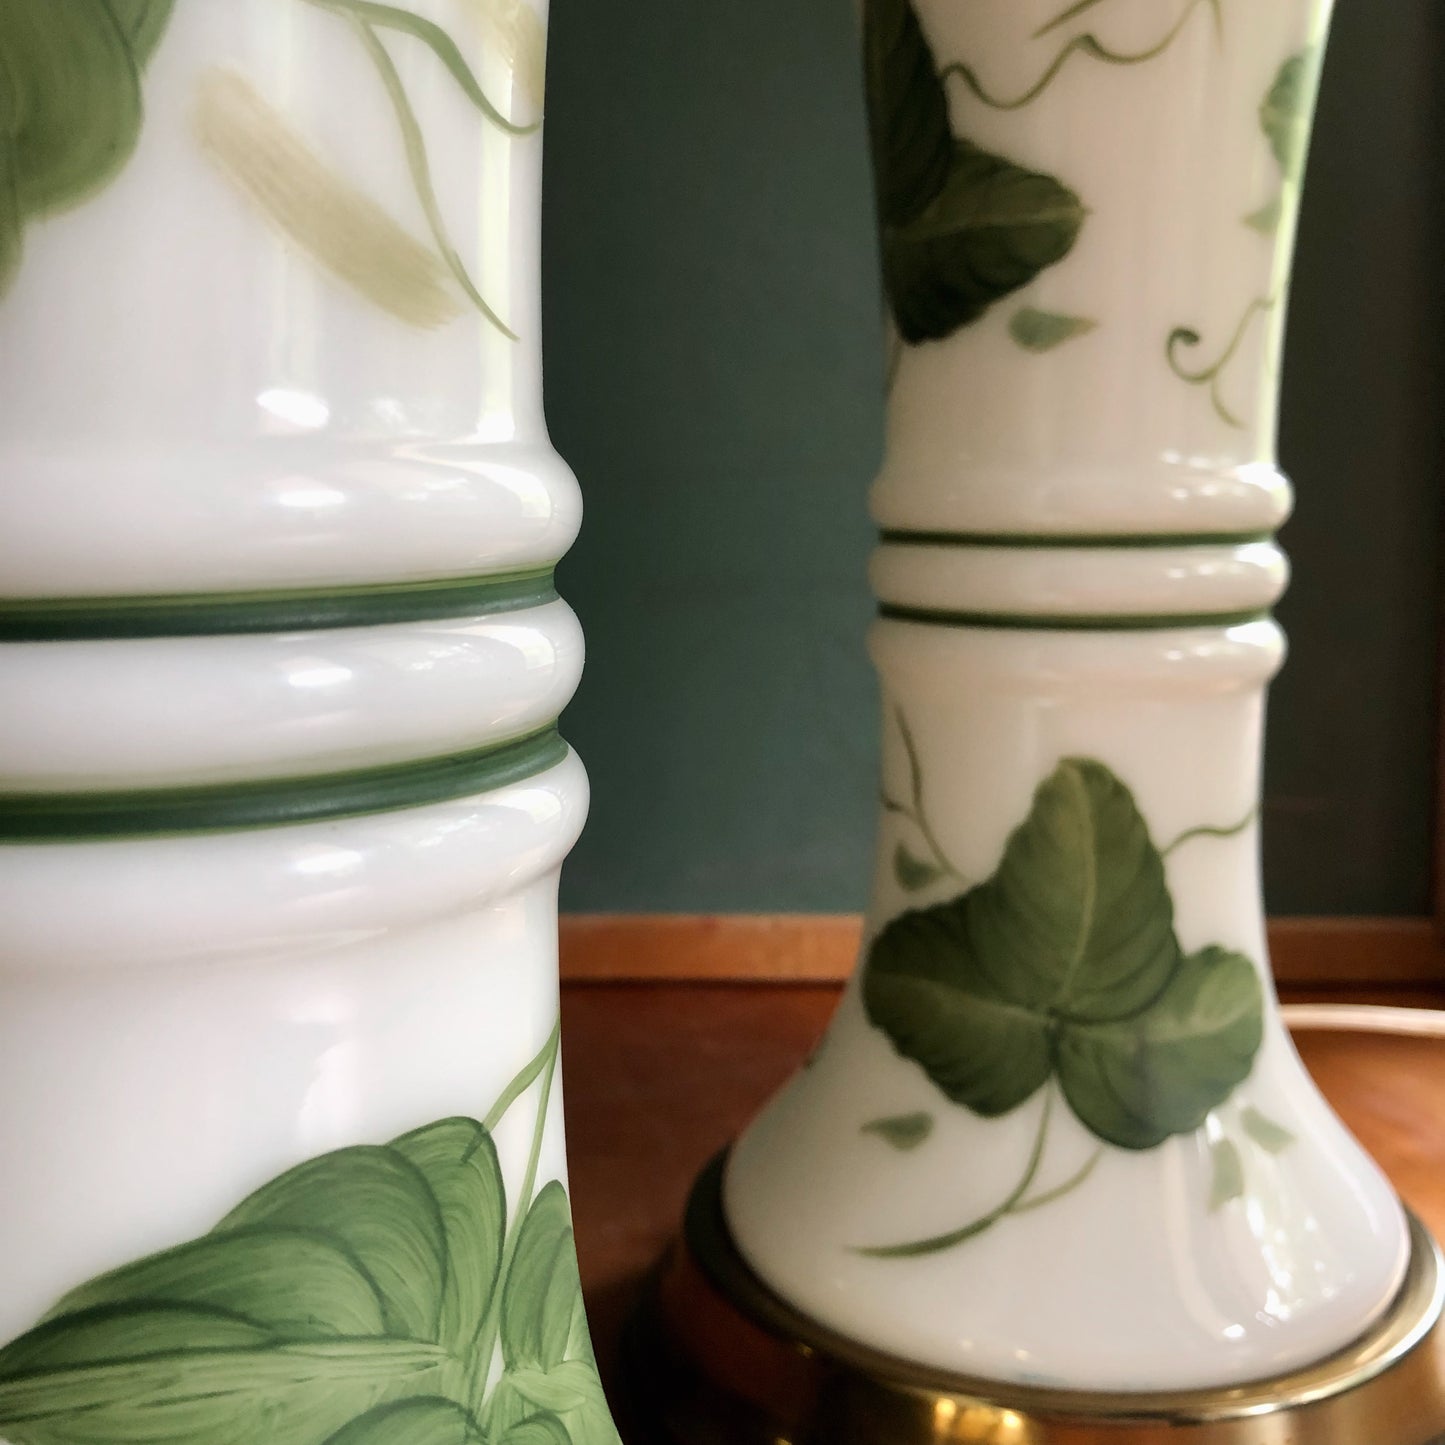 Vintage Leviton Milk Glass and Green Ivy Table Lamps (c.1950s)